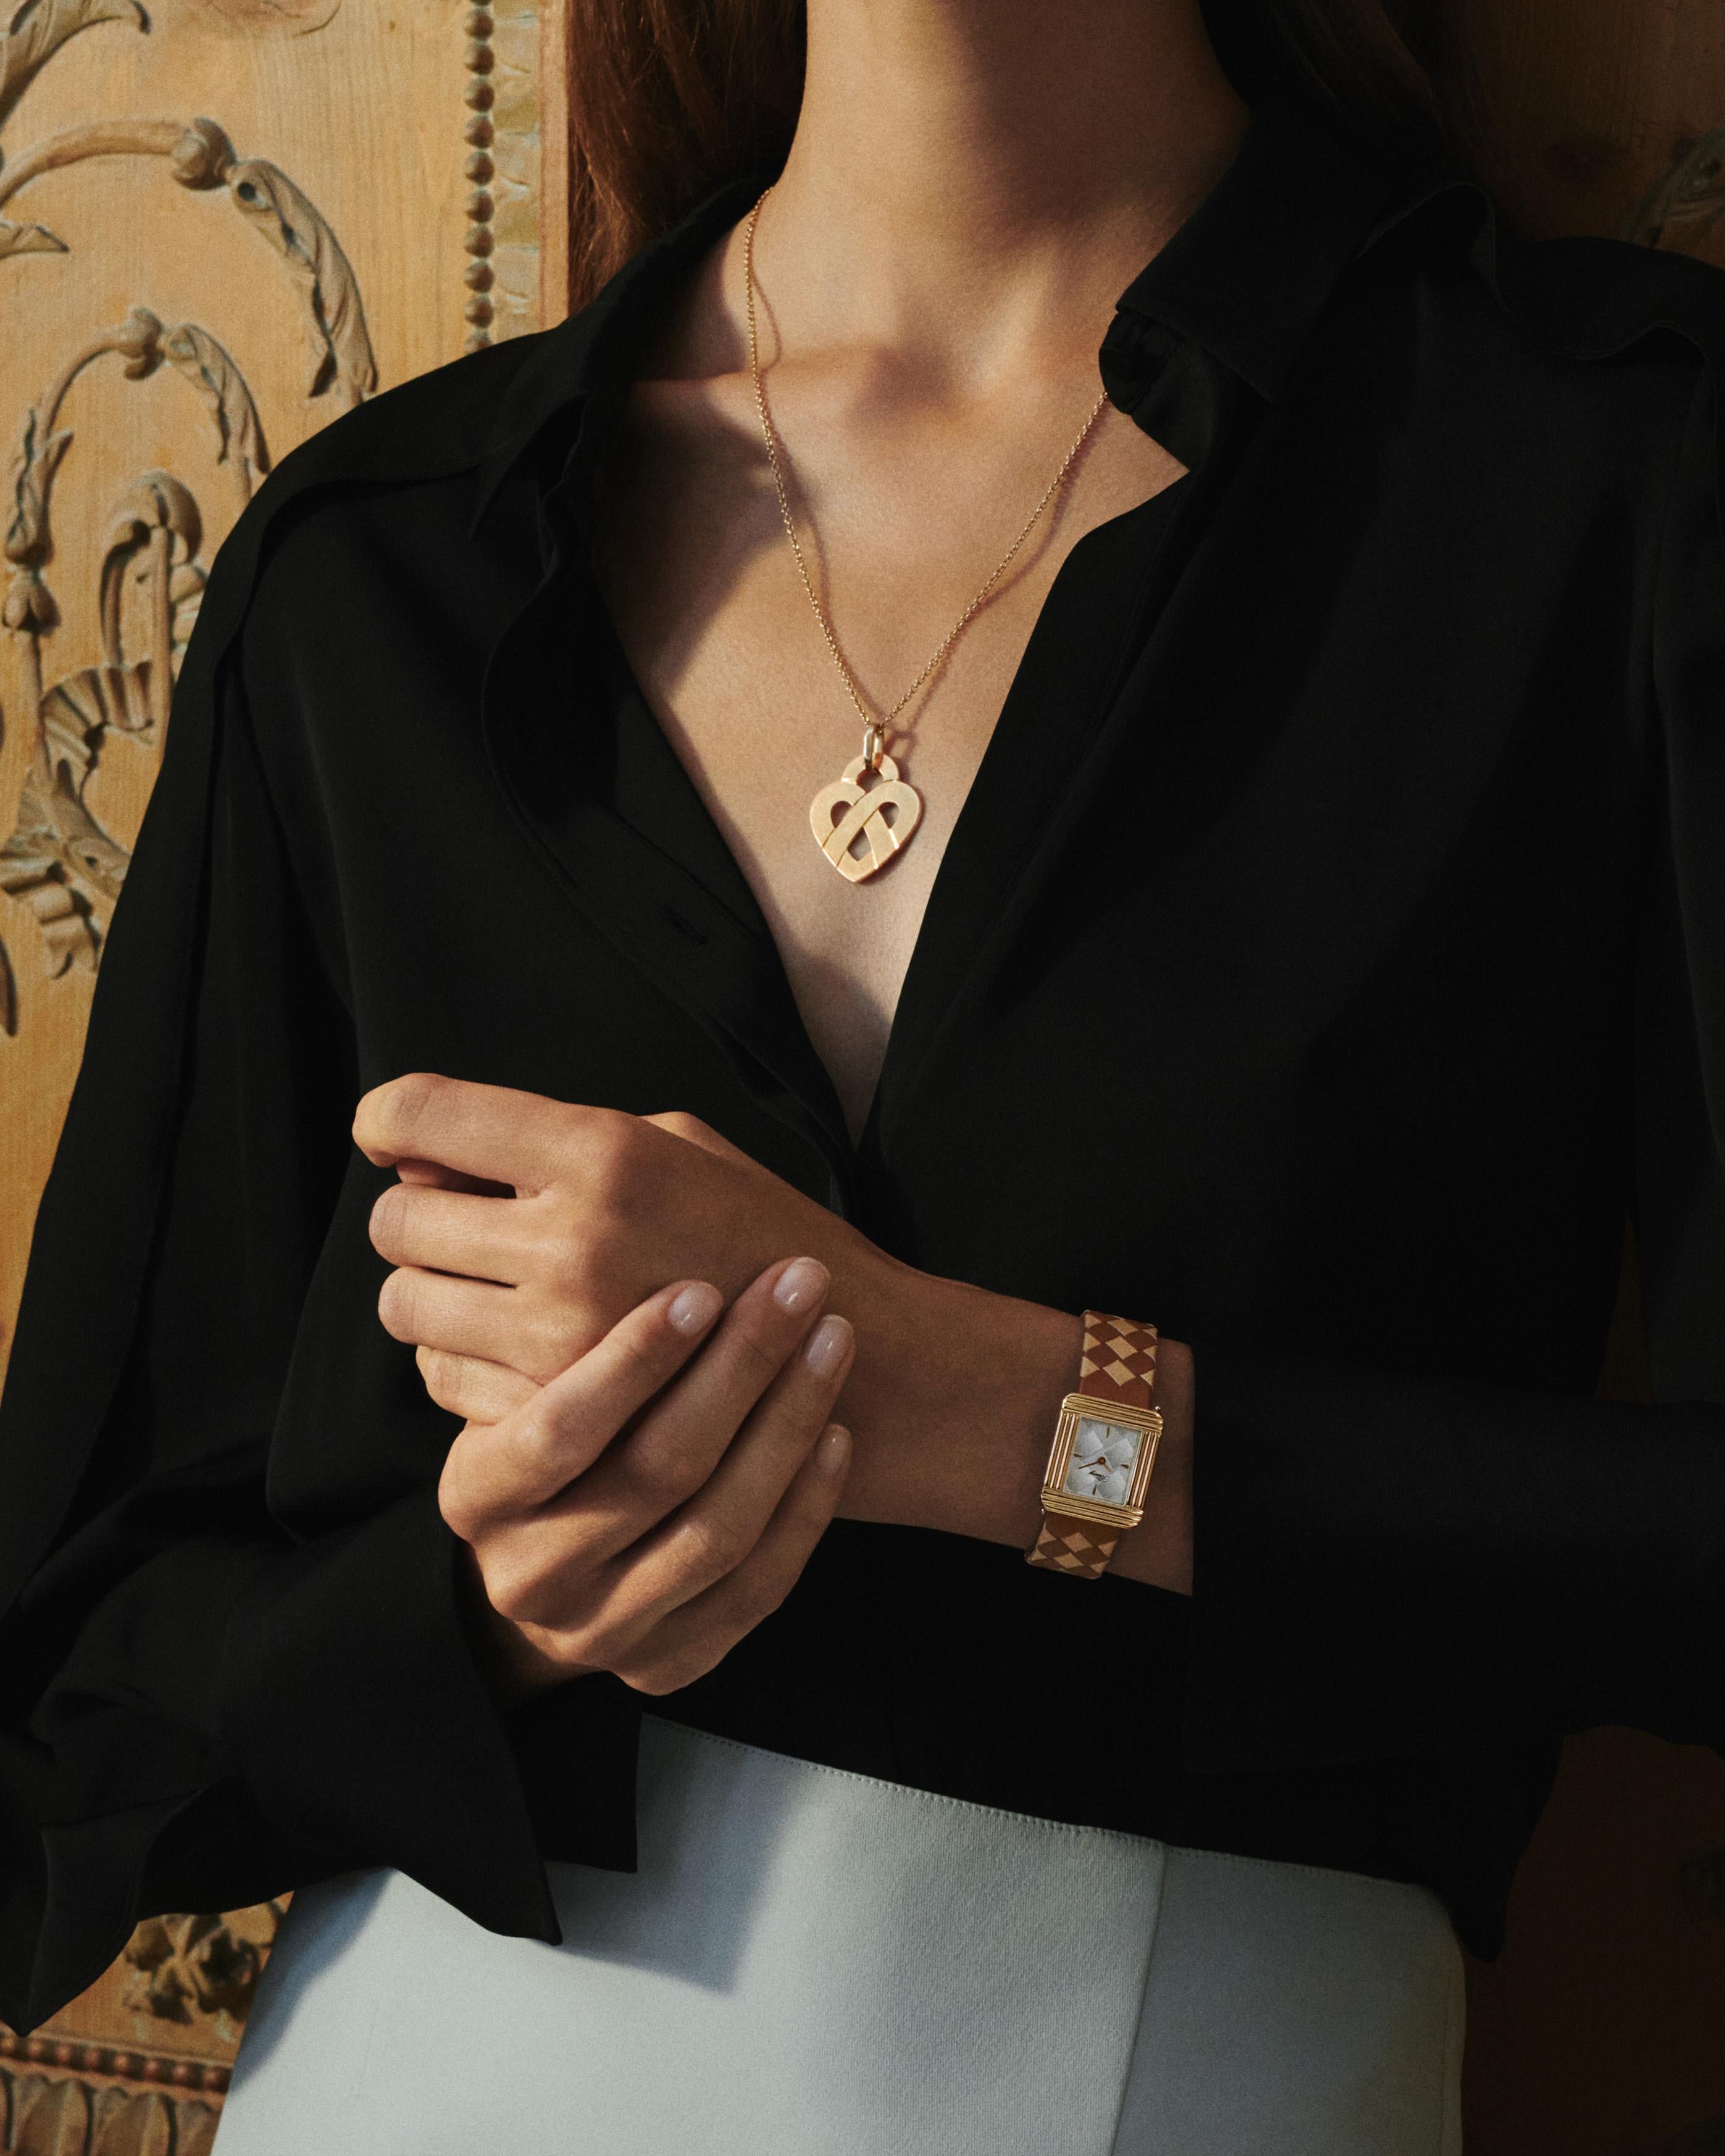 The timeless Poiray collection Cœur Entrelacé is revealed in pure lines, with generous curves, and is dressed in gold or diamonds to celebrate all loves.

Cœur Entrelacé pendant, large model in rose gold.

Please note that the carat weight, number